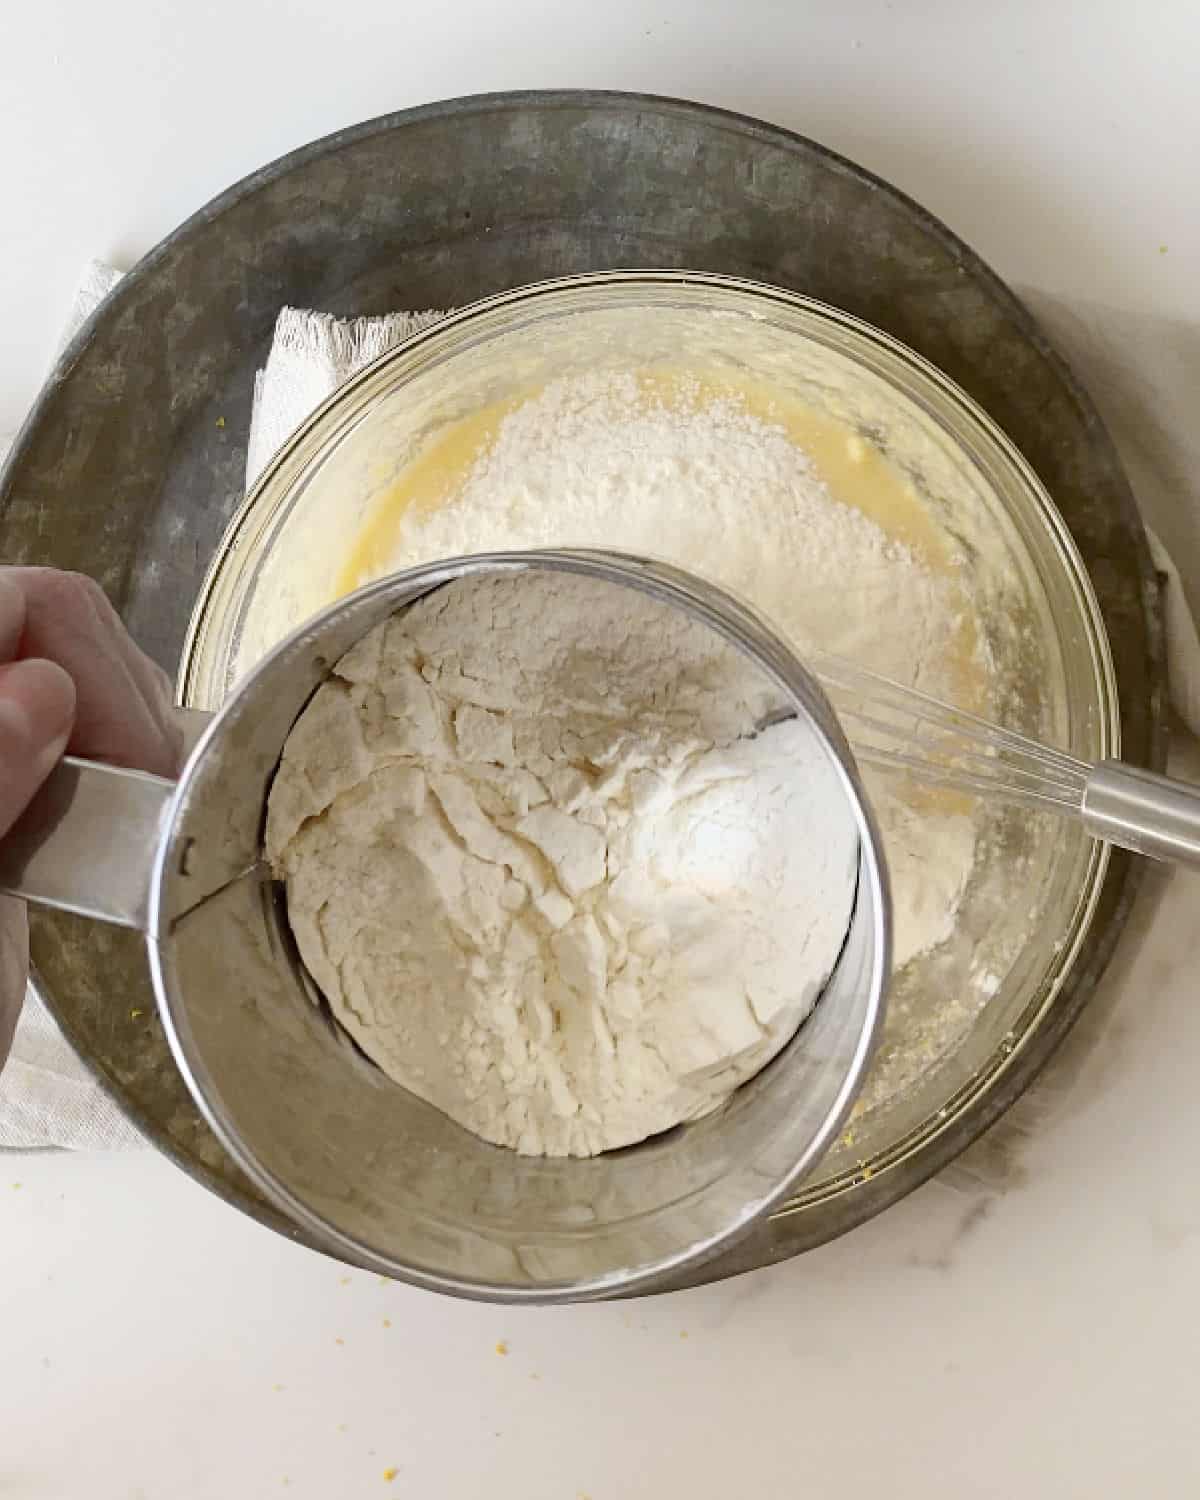 Flour being sifted over lemon batter in a glass bowl on a metal tray. White marble surface.